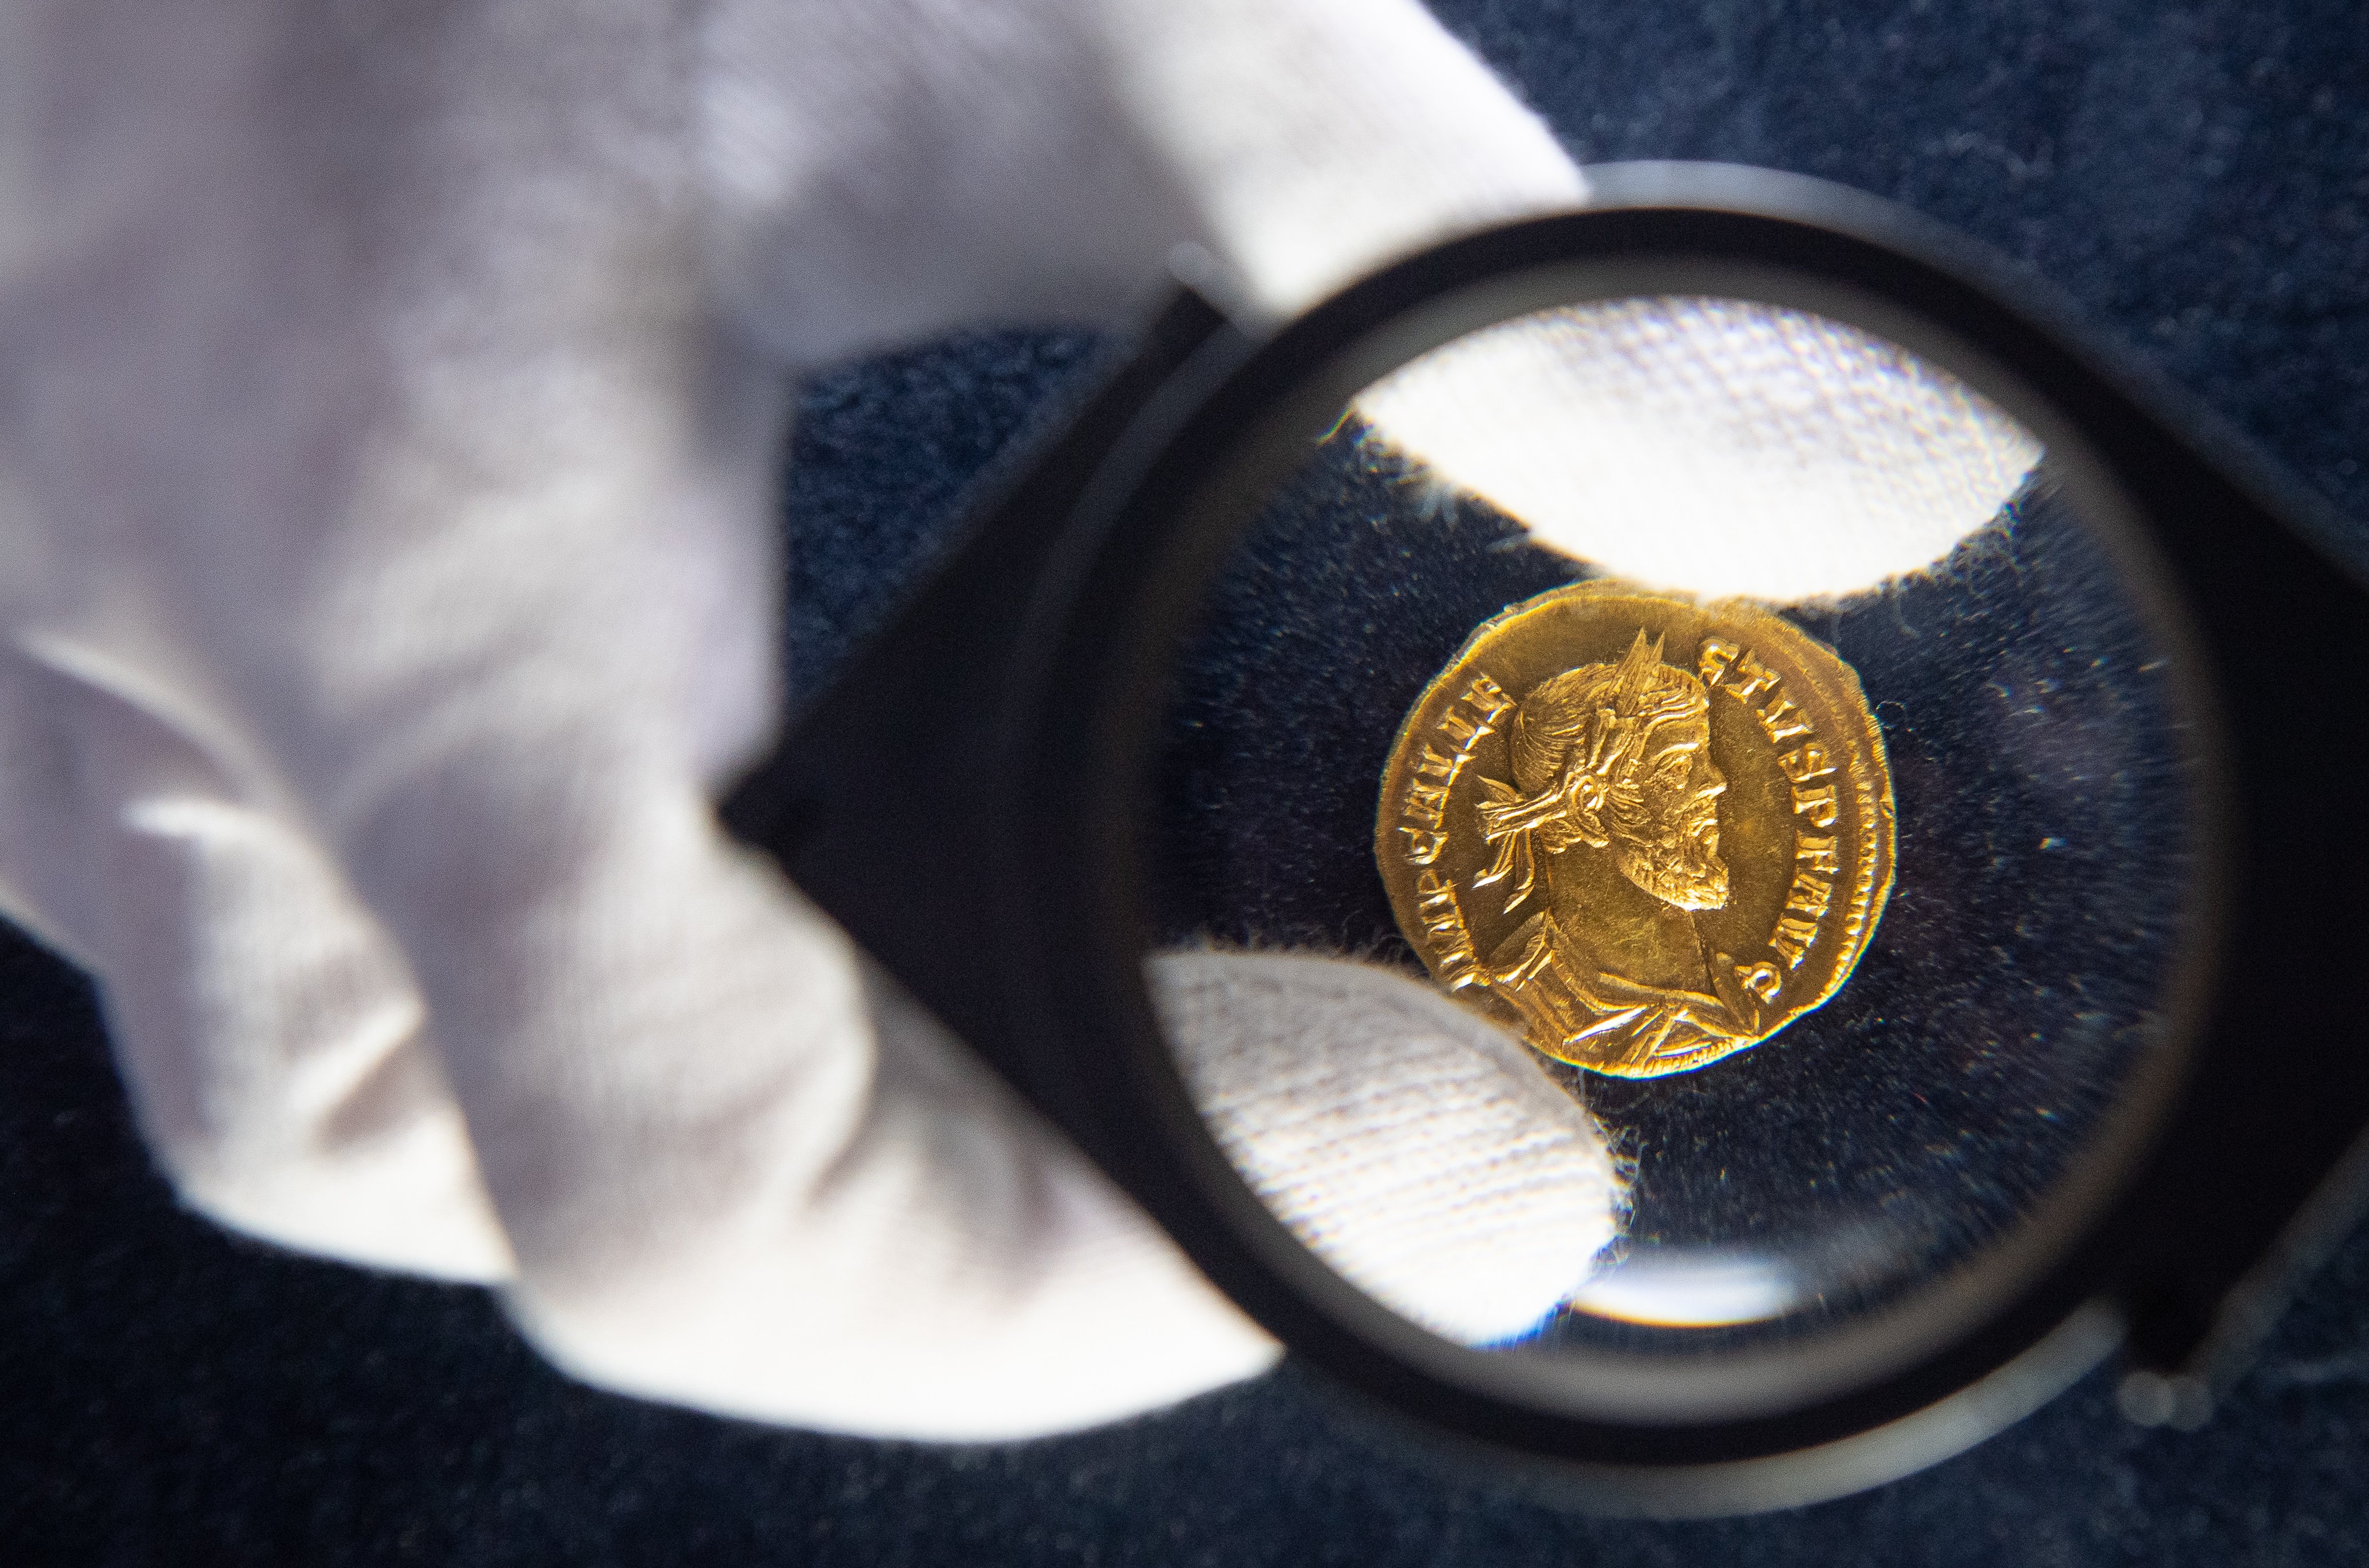 He Owns World Famous Stamps and a Prized Coin. Now He's Selling